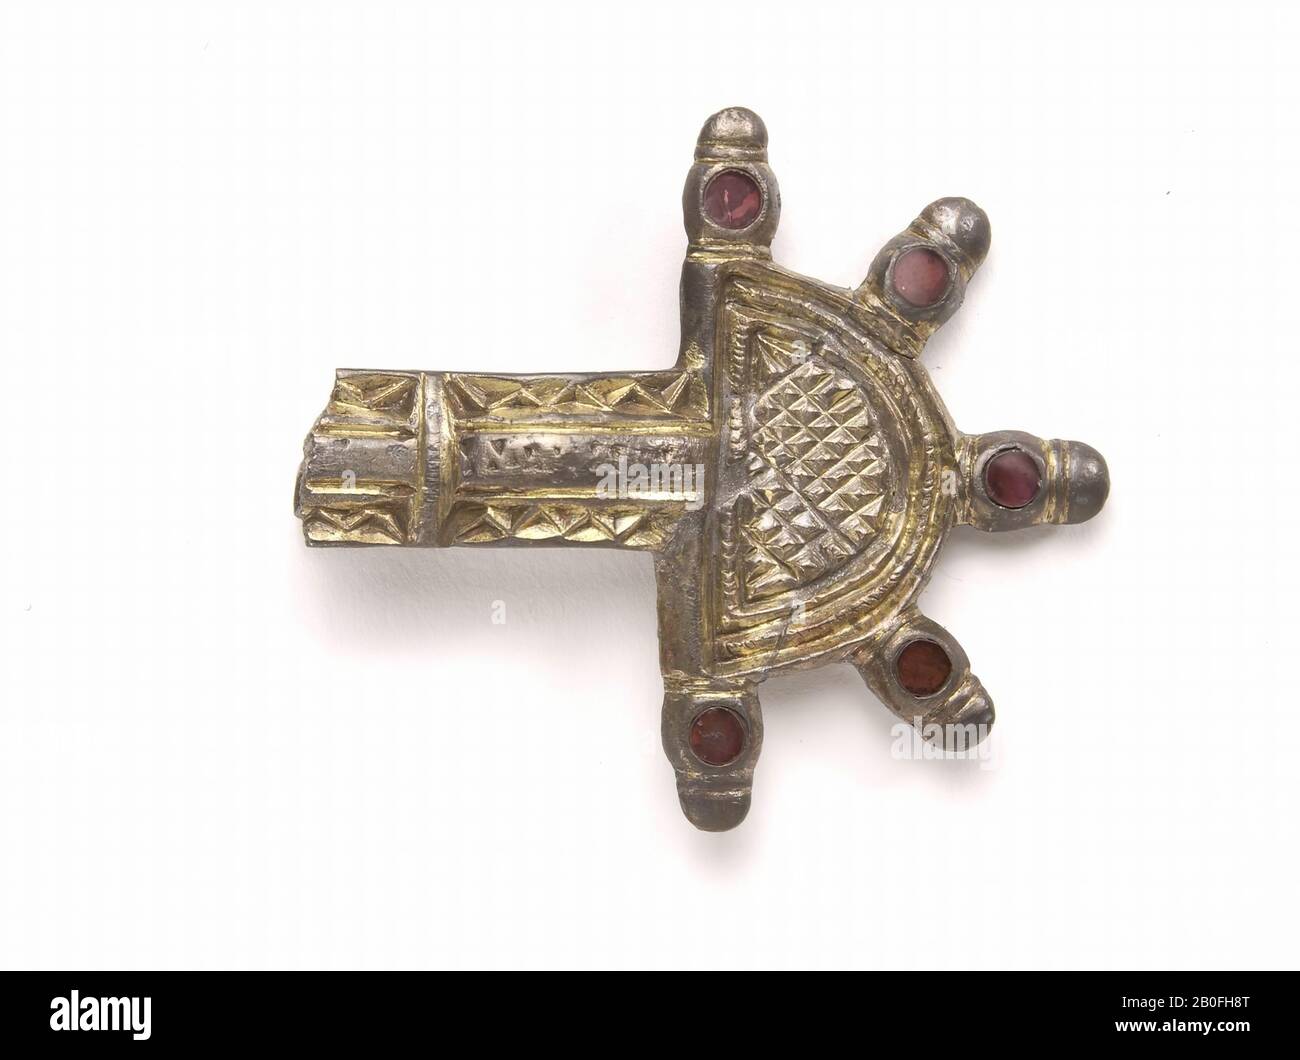 Frankish fibula. The semi-circular head plate is decorated with a diamond pattern and five buttons that are inlaid with round red glass discs. The bracket has a zigzag ornament. The lower part of the needle holder is broken., Fibula, clamp fibula, metal, silver (gold plated), almandine, 1,1 x 5,1 x 5,1 cm, 11,7 gram, vmeb 485-530, Netherlands, Gelderland, Neder -Betuwe, Echteld Stock Photo